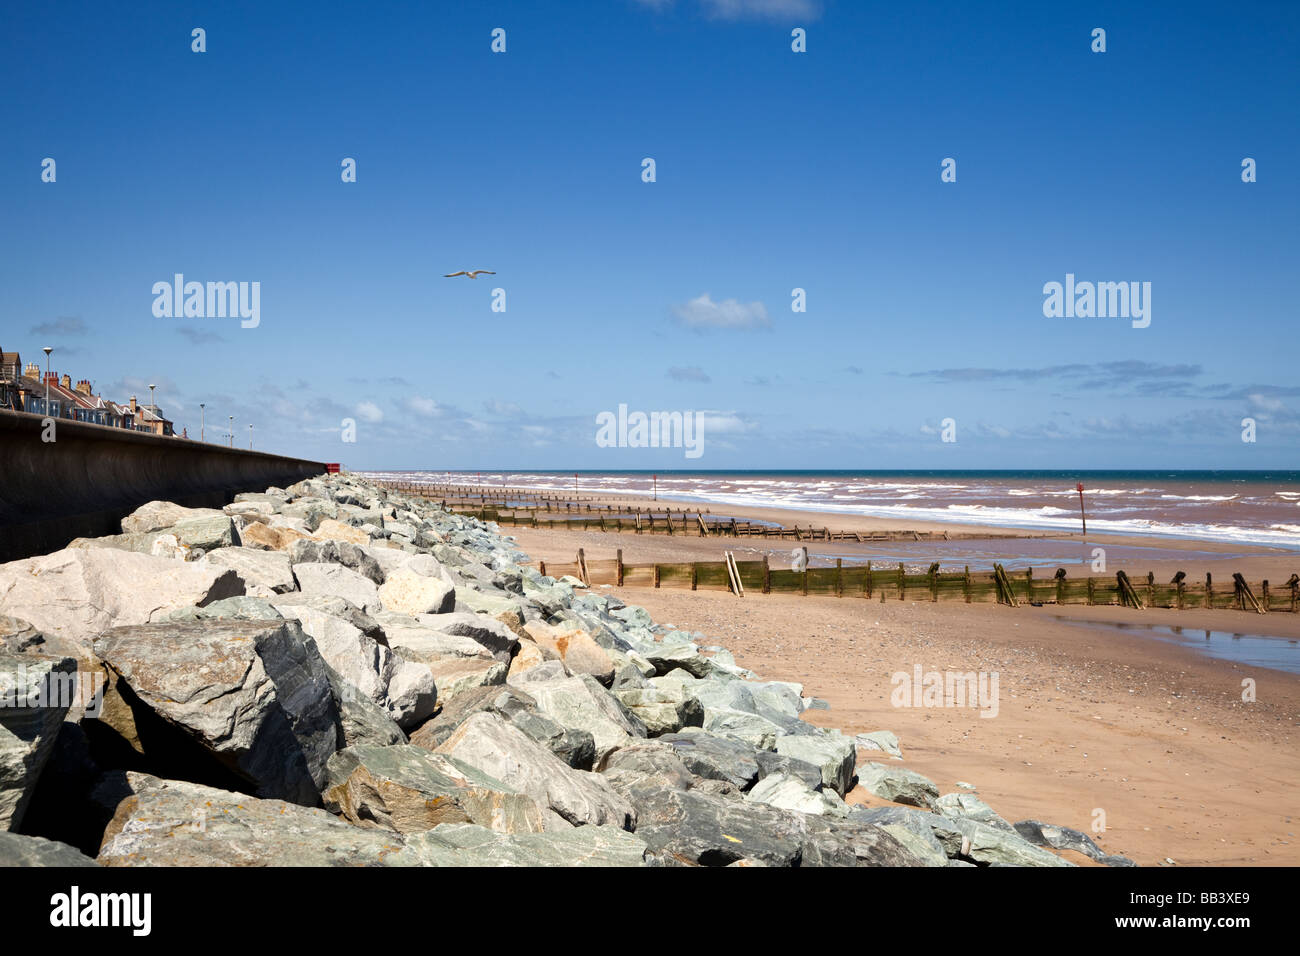 Granite boulder and wooden breakwaters protection for the sea wall at Withernsea East Yorkshire England UK Stock Photo